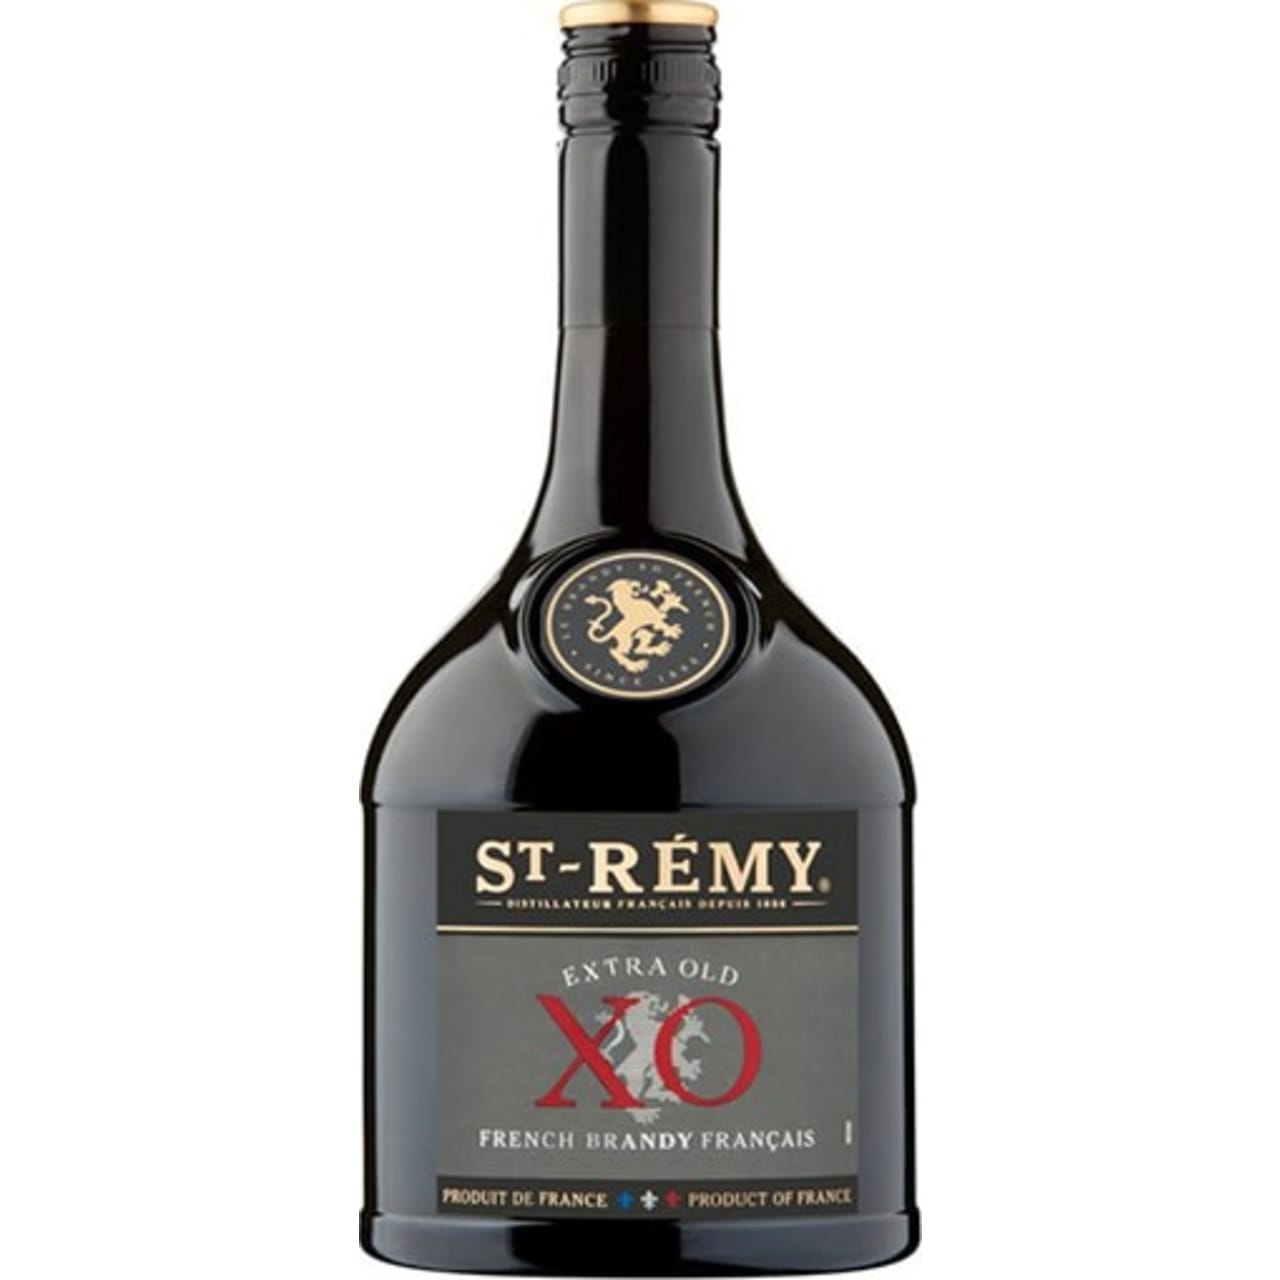 Brandy of character with complex aromas and rich taste. Recognised for its elegance and roundness.